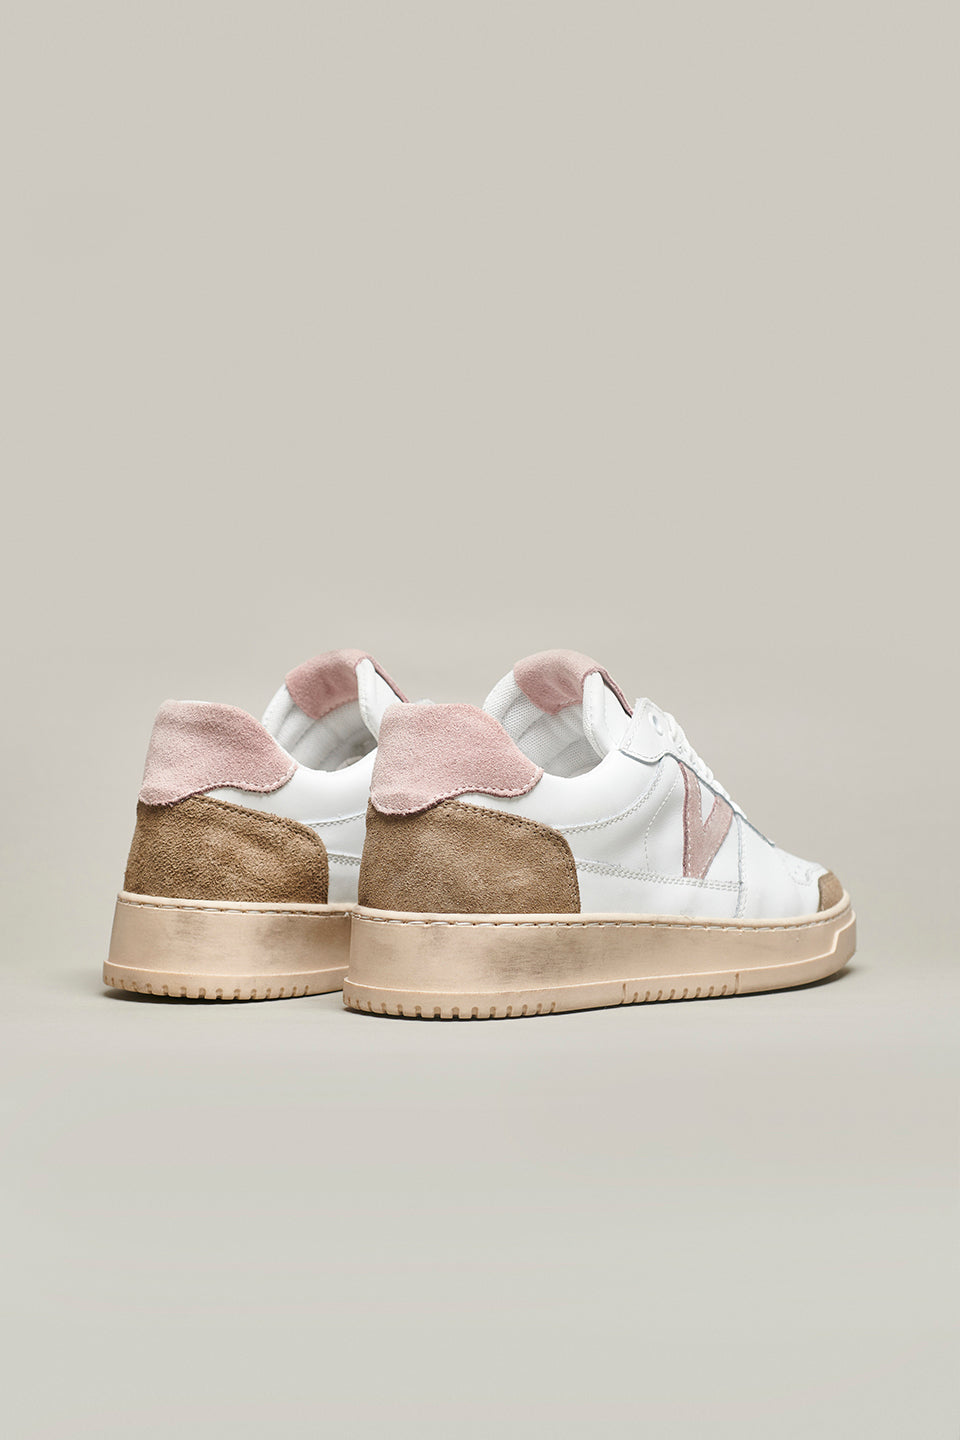 COLLEGE - White sneakers with pink suede back and insert